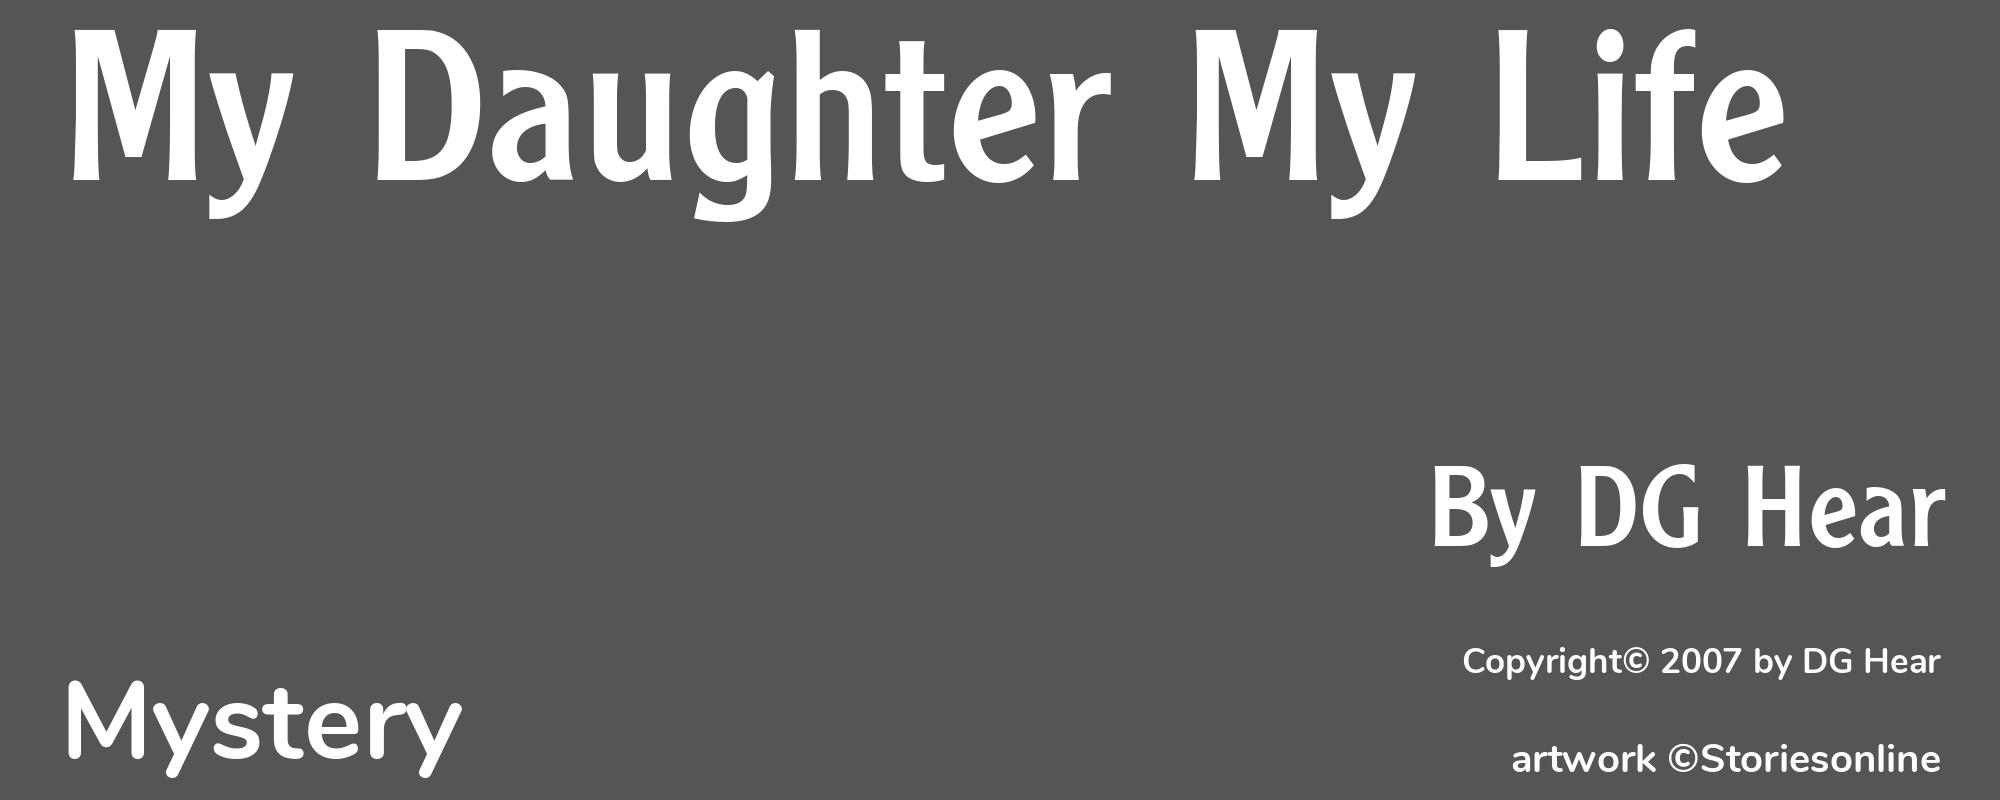 My Daughter My Life - Cover